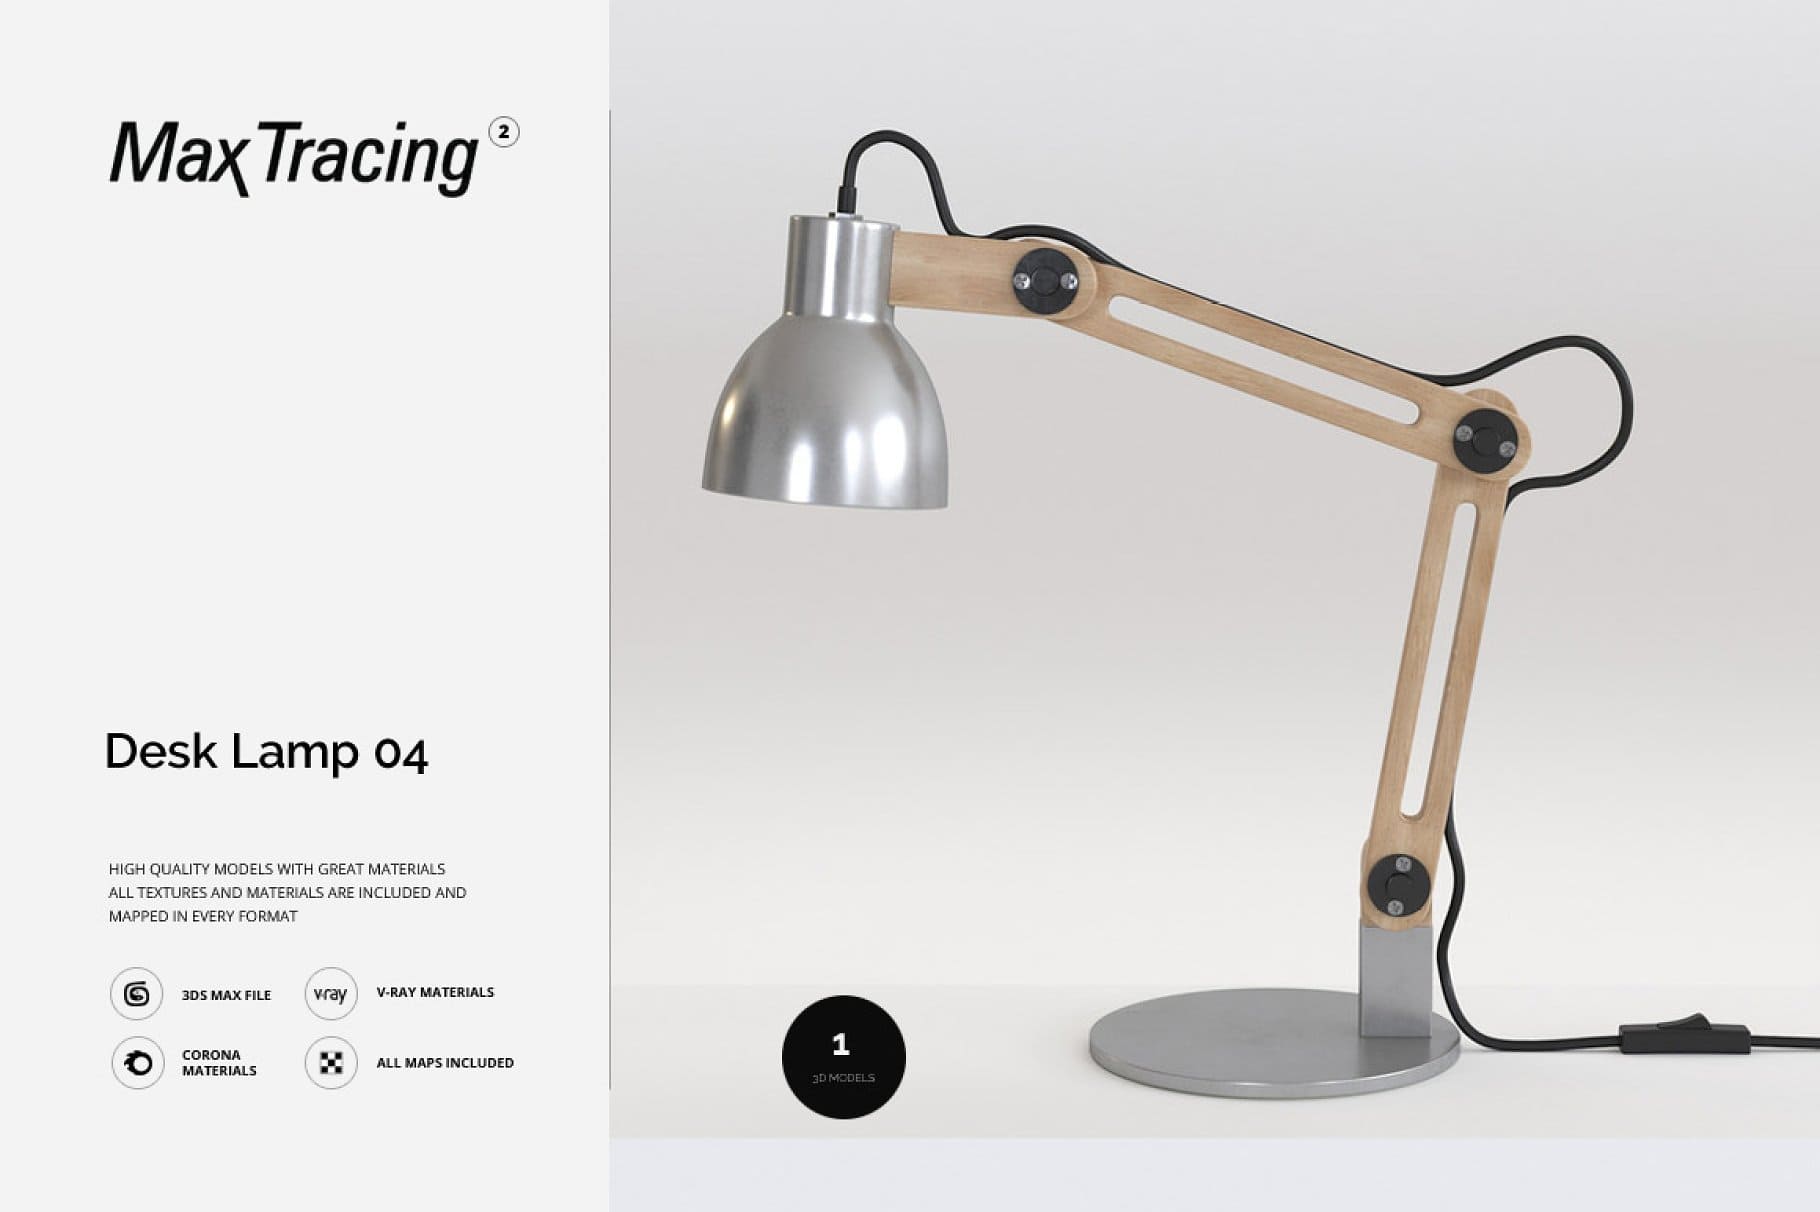 Table lamp with the title "MaxTracing" with a wooden stand.